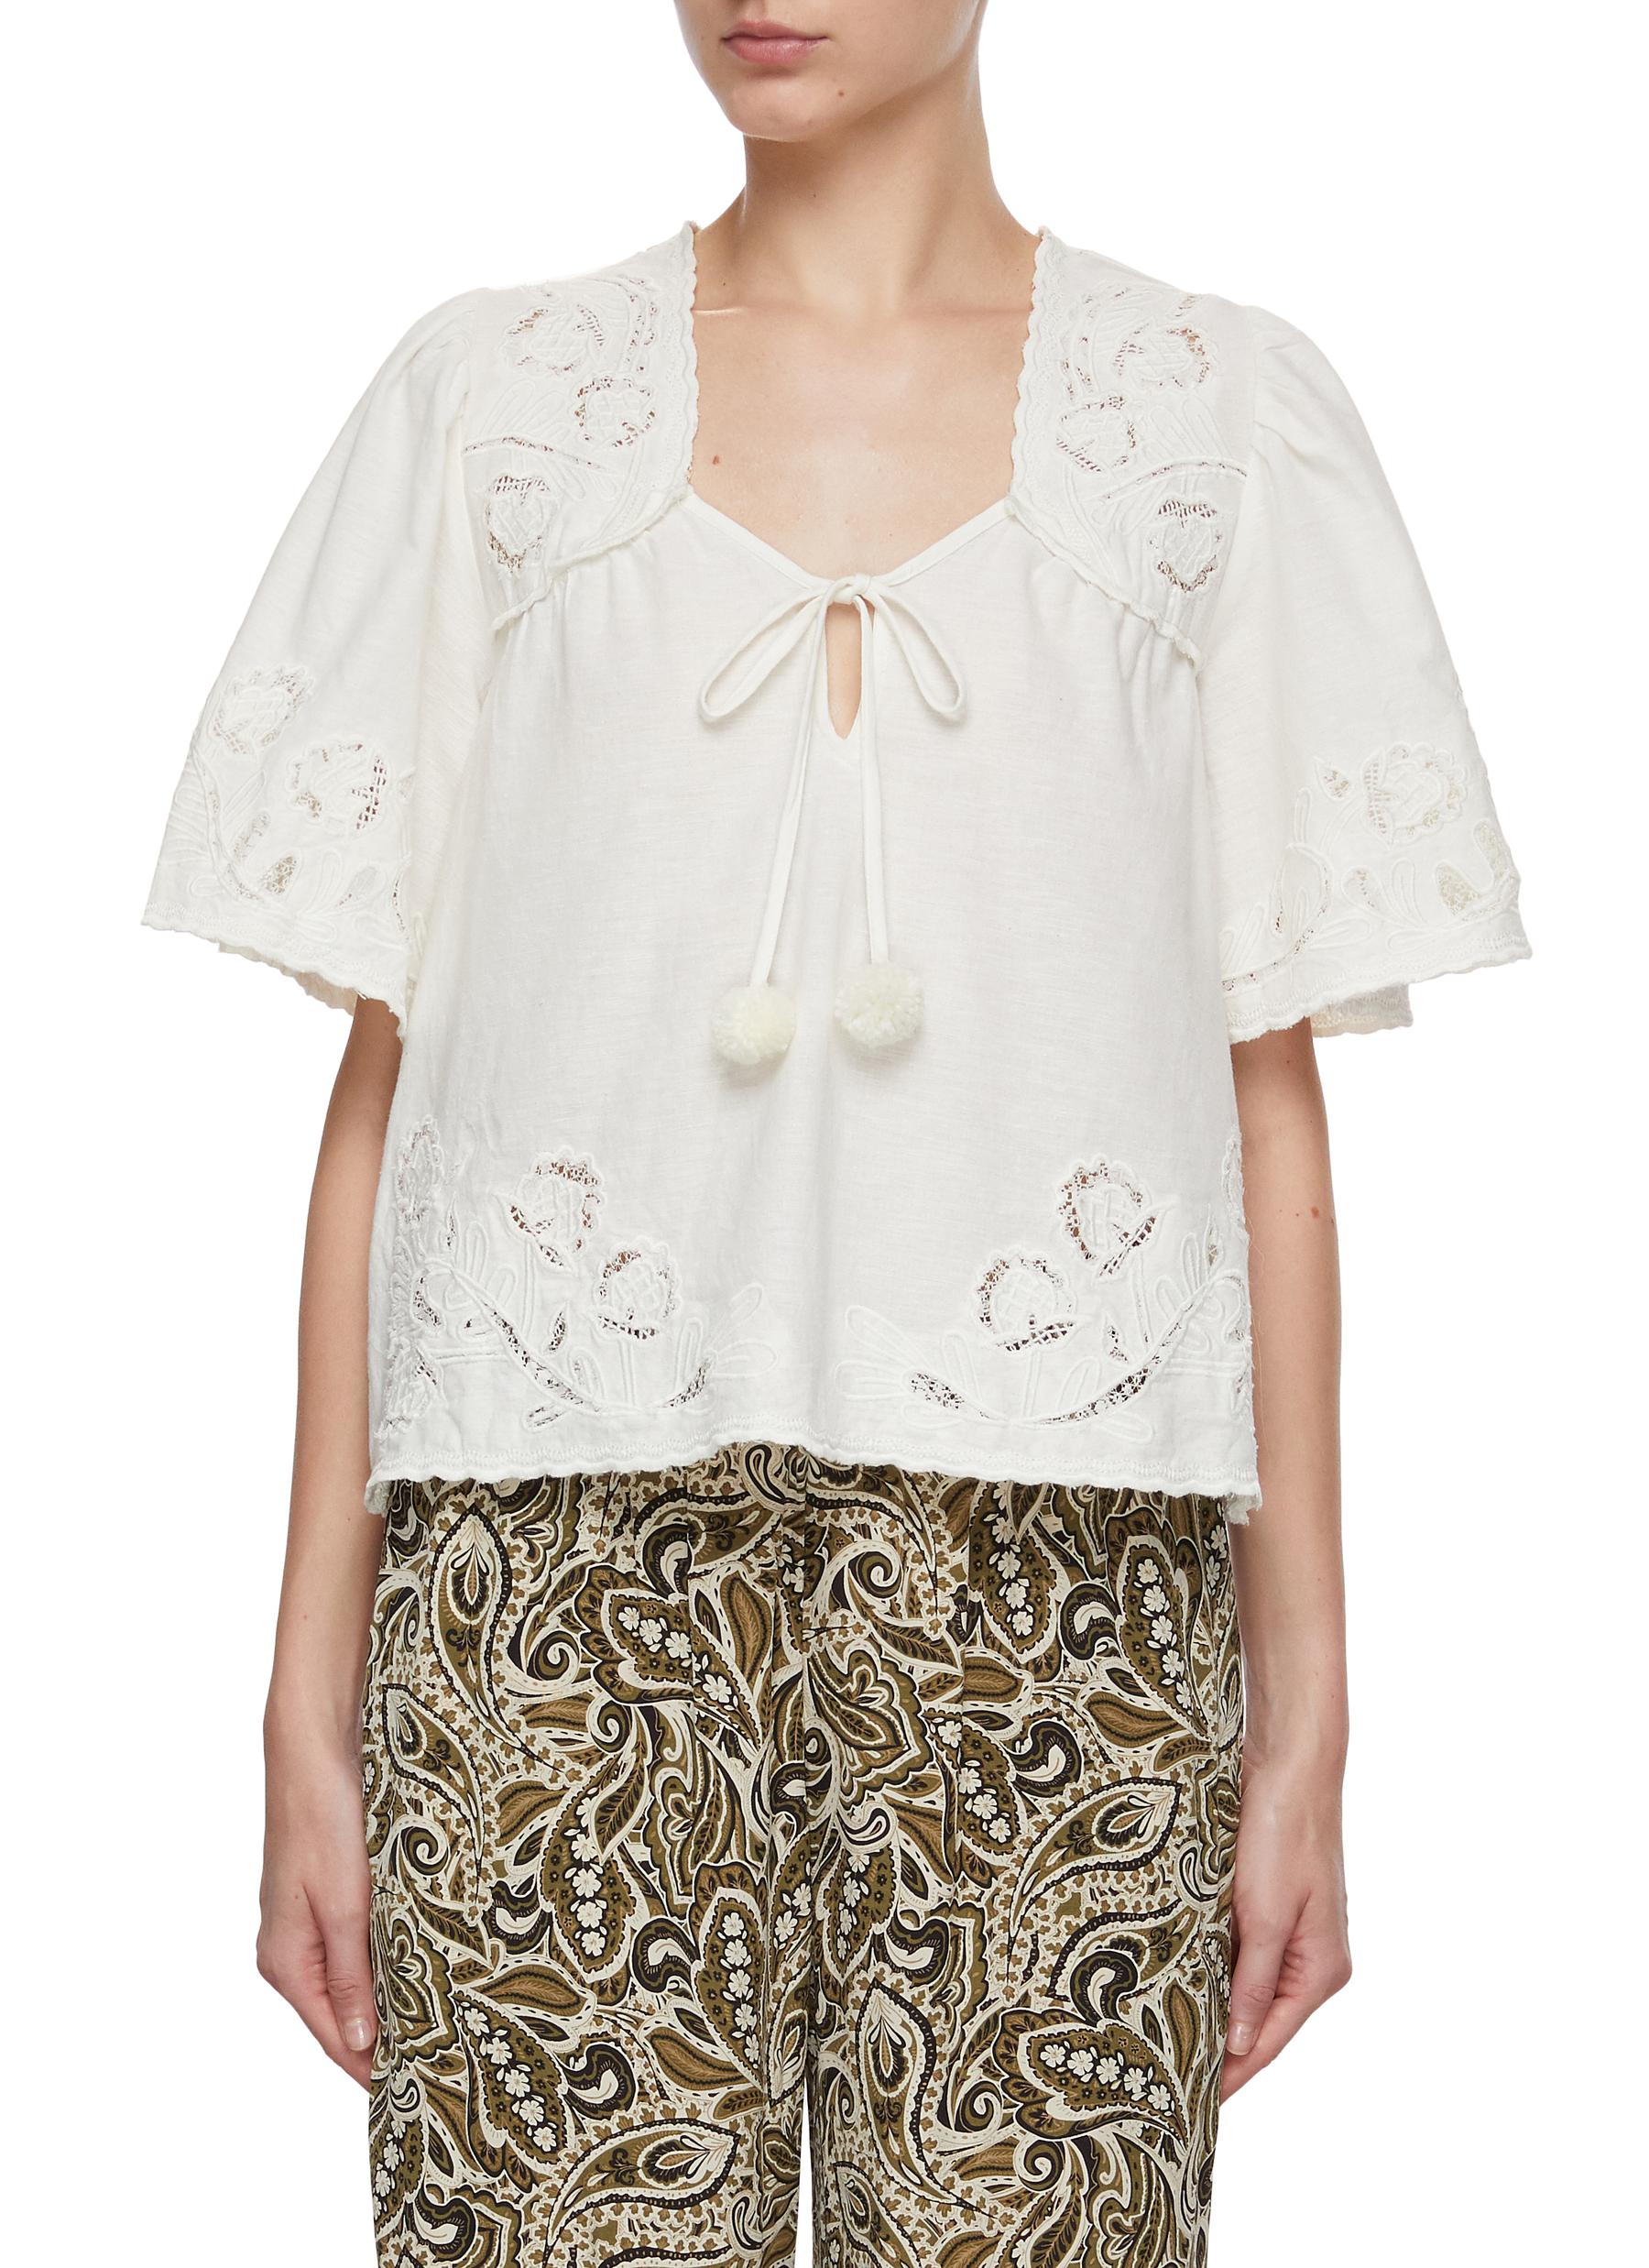 Sea Baylin Lace-trimmed Crepe Top in Natural